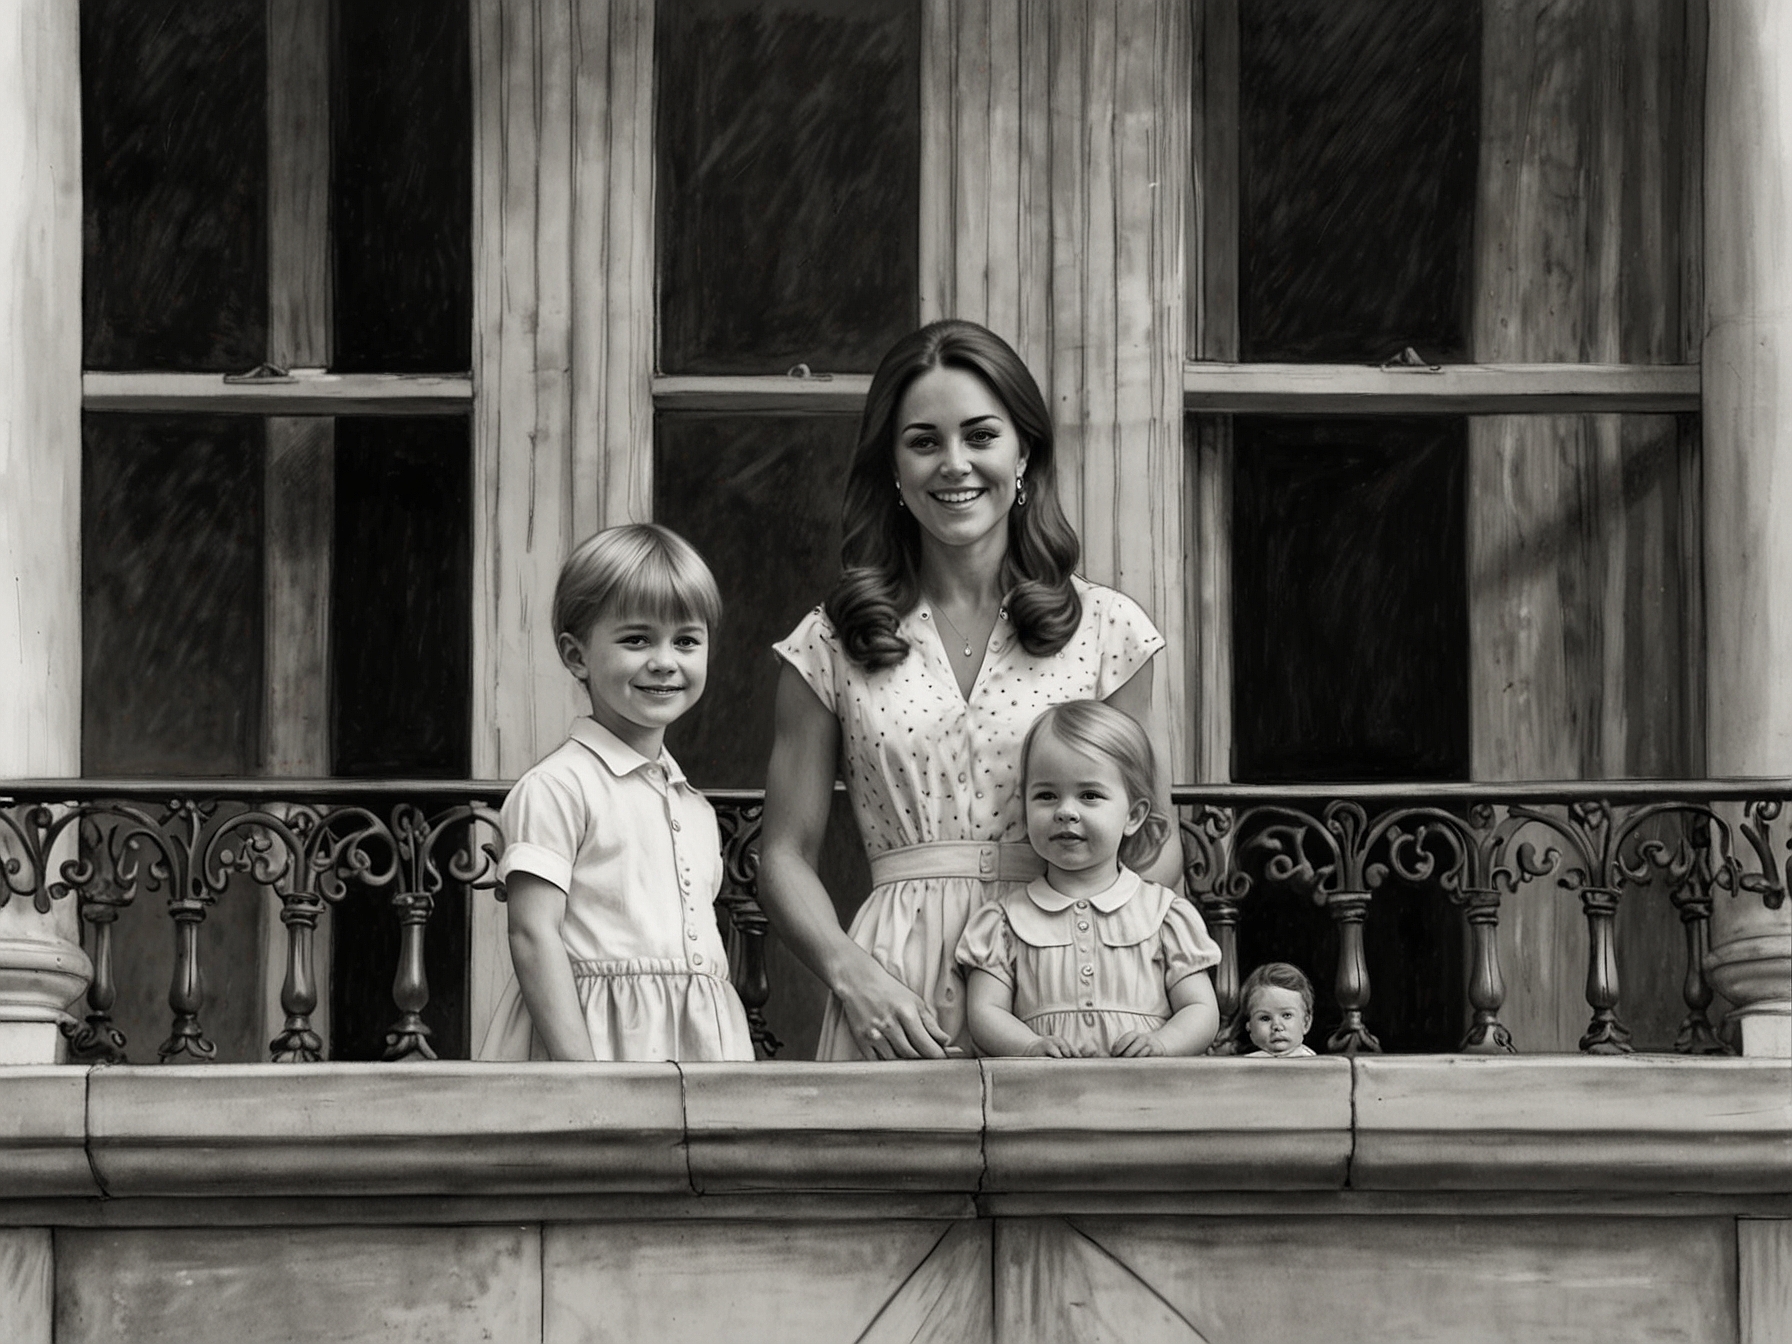 Kate Middleton stands on the Buckingham Palace balcony with Prince William and their children. She exudes grace and stability, symbolizing unity and continuity in the royal family.